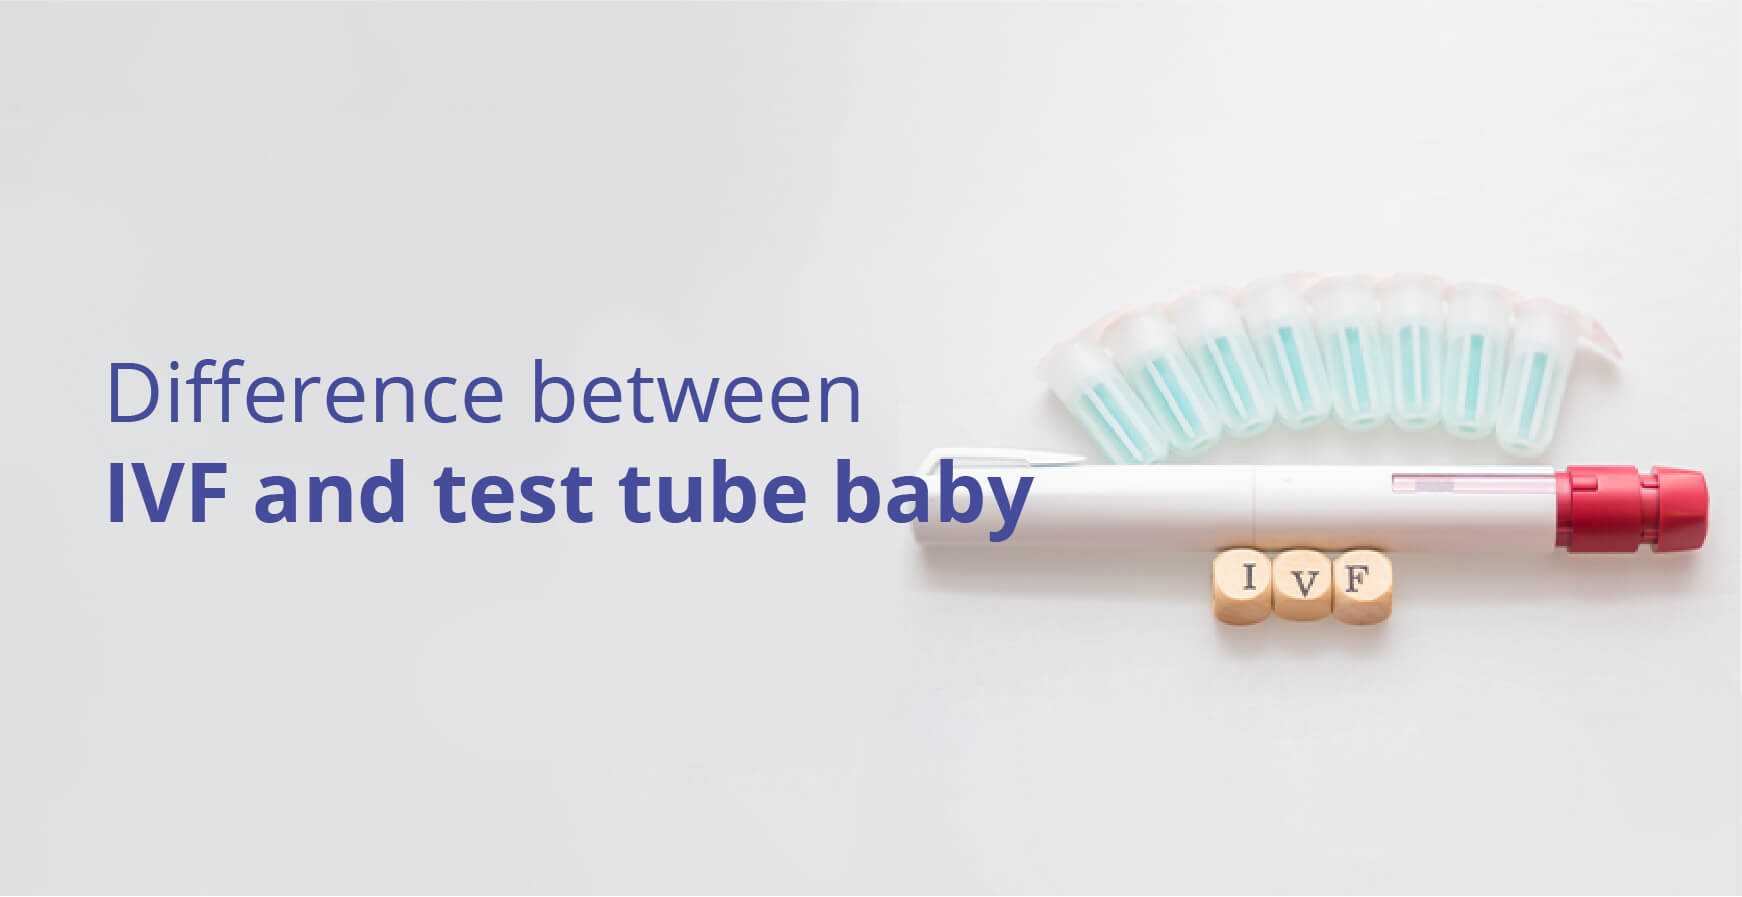 Difference between a test tube baby and IVF